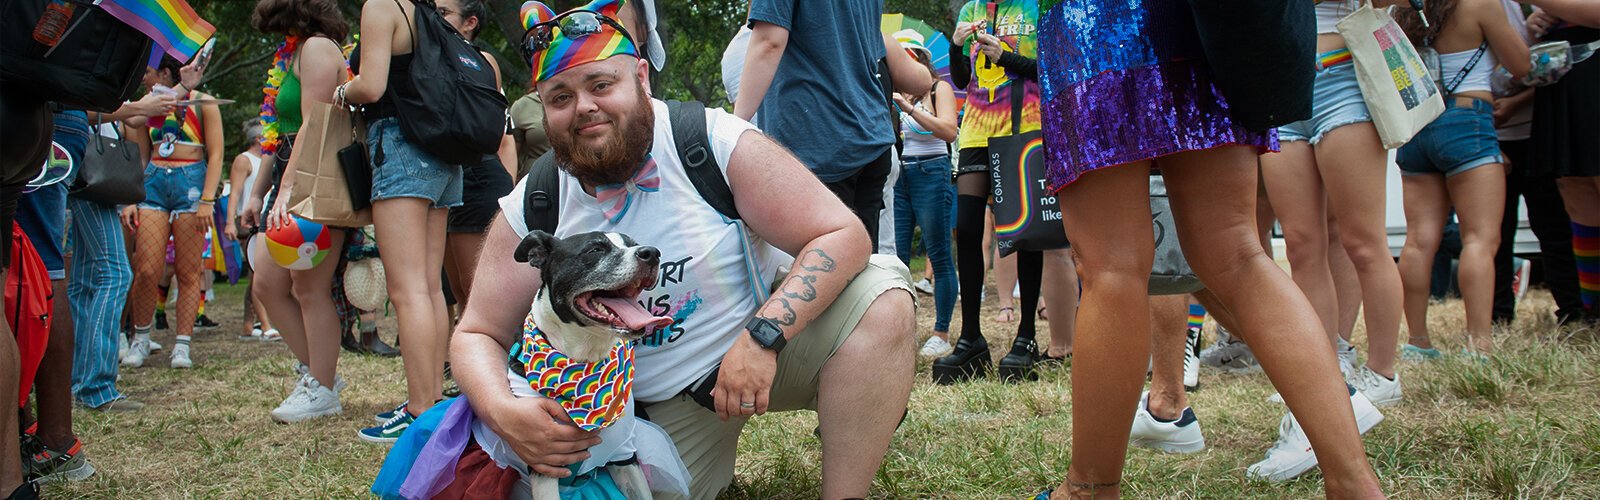  Aiden Elmore, from Sarasota, brought his dog, Emilie, to this years St Pete Pride Parade. It was Aiden’s third time attending the event.